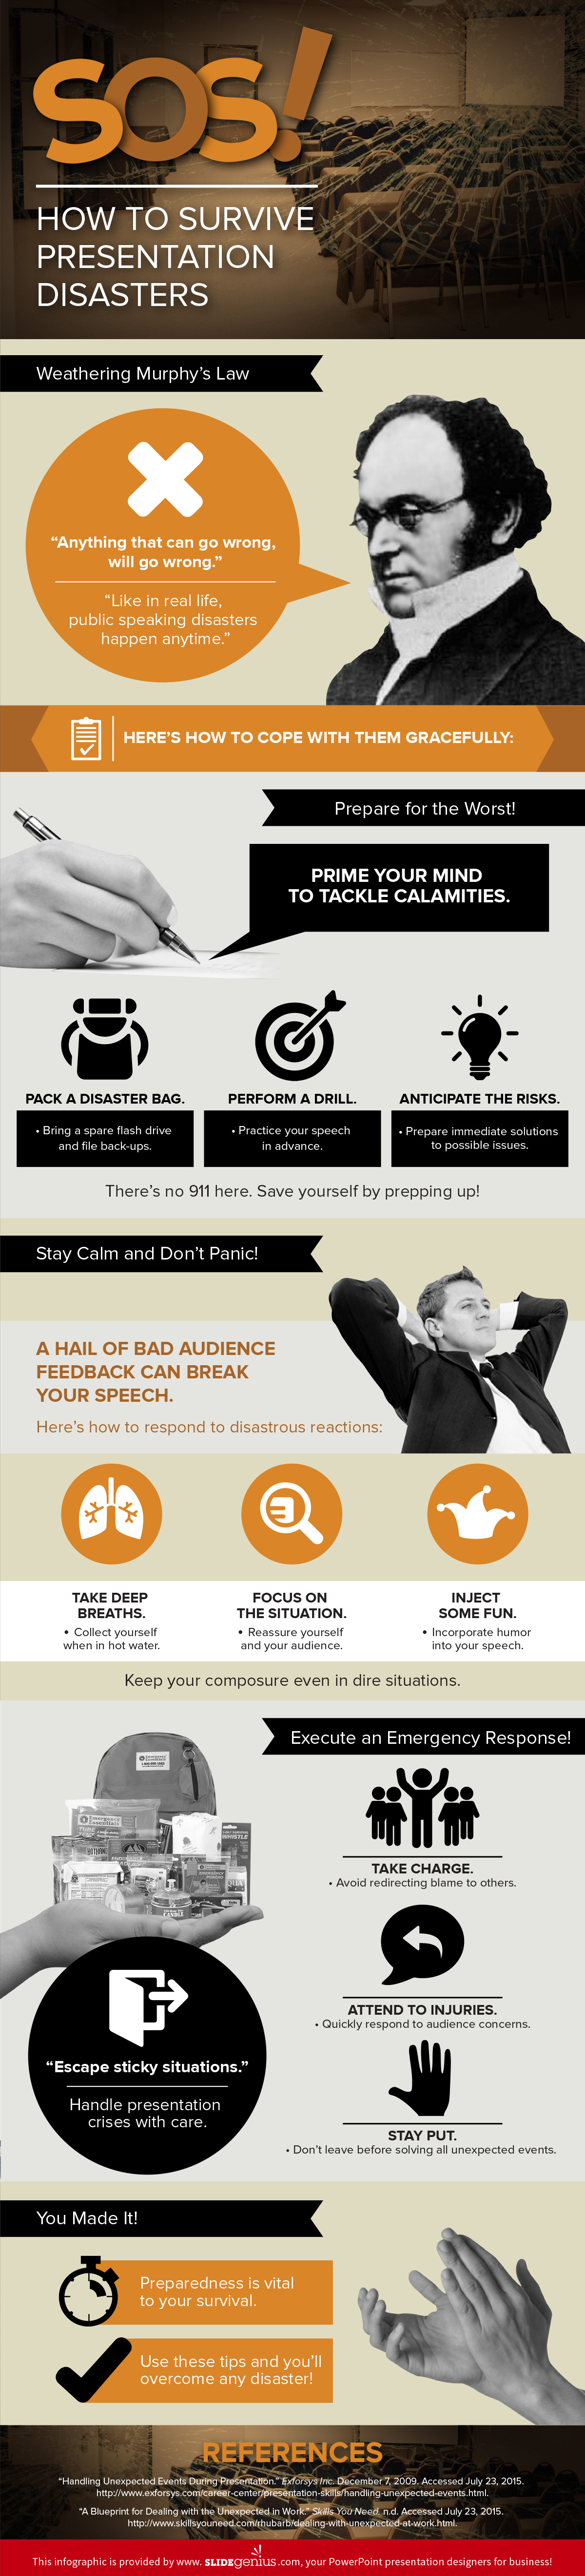 SOS! How to Survive Presentation Disasters